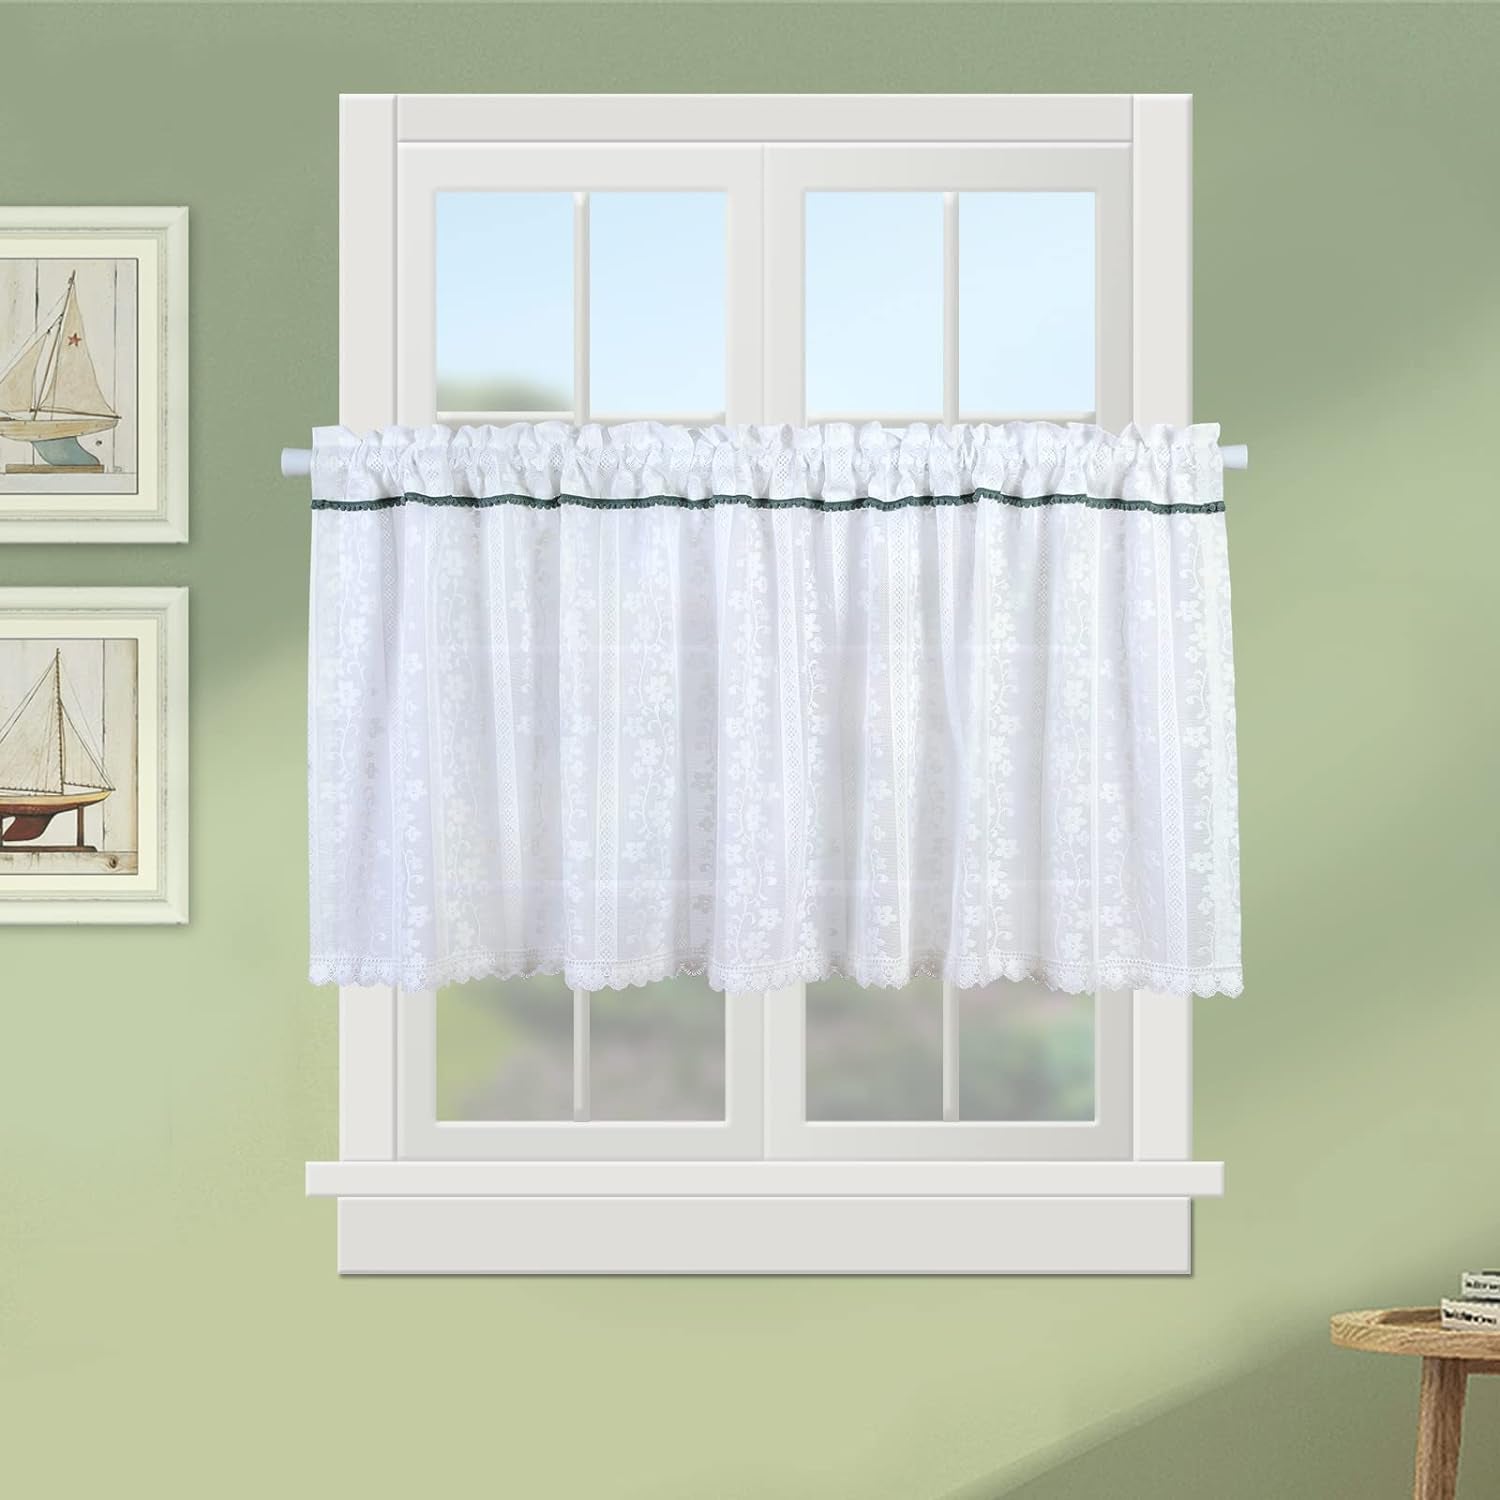 Elegant Floral Design Lace Valance Sheer for Windows 78X16Inch. White Embroidered Curtain for Kitchen Door Cafe Dinning Bath Room 1 Pcs